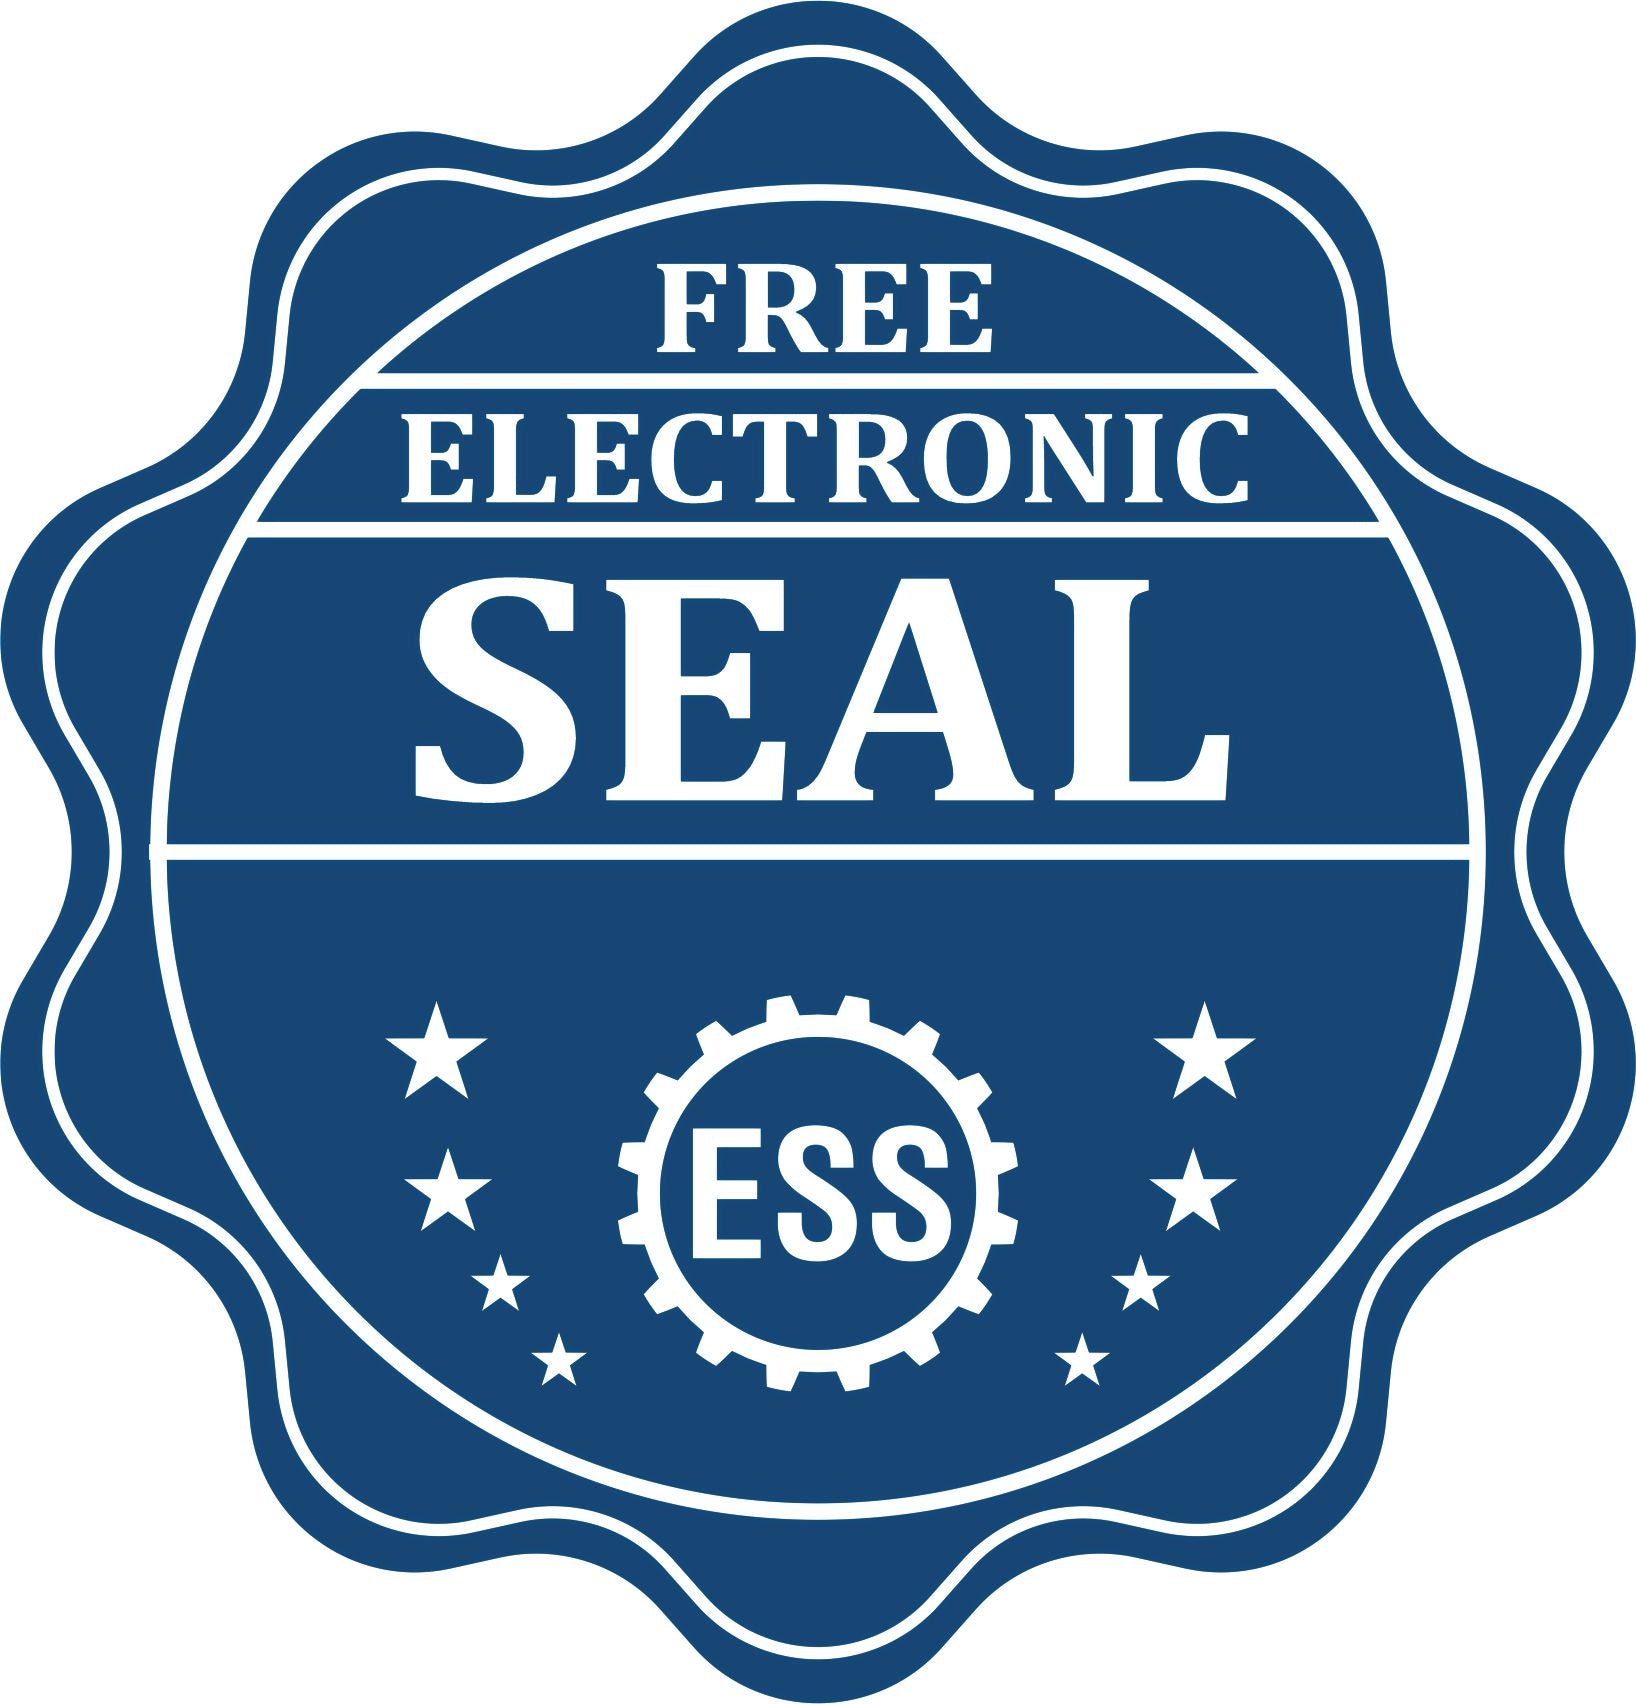 A badge showing a free electronic seal for the Gift Alabama Land Surveyor Seal with stars and the ESS gear on the emblem.